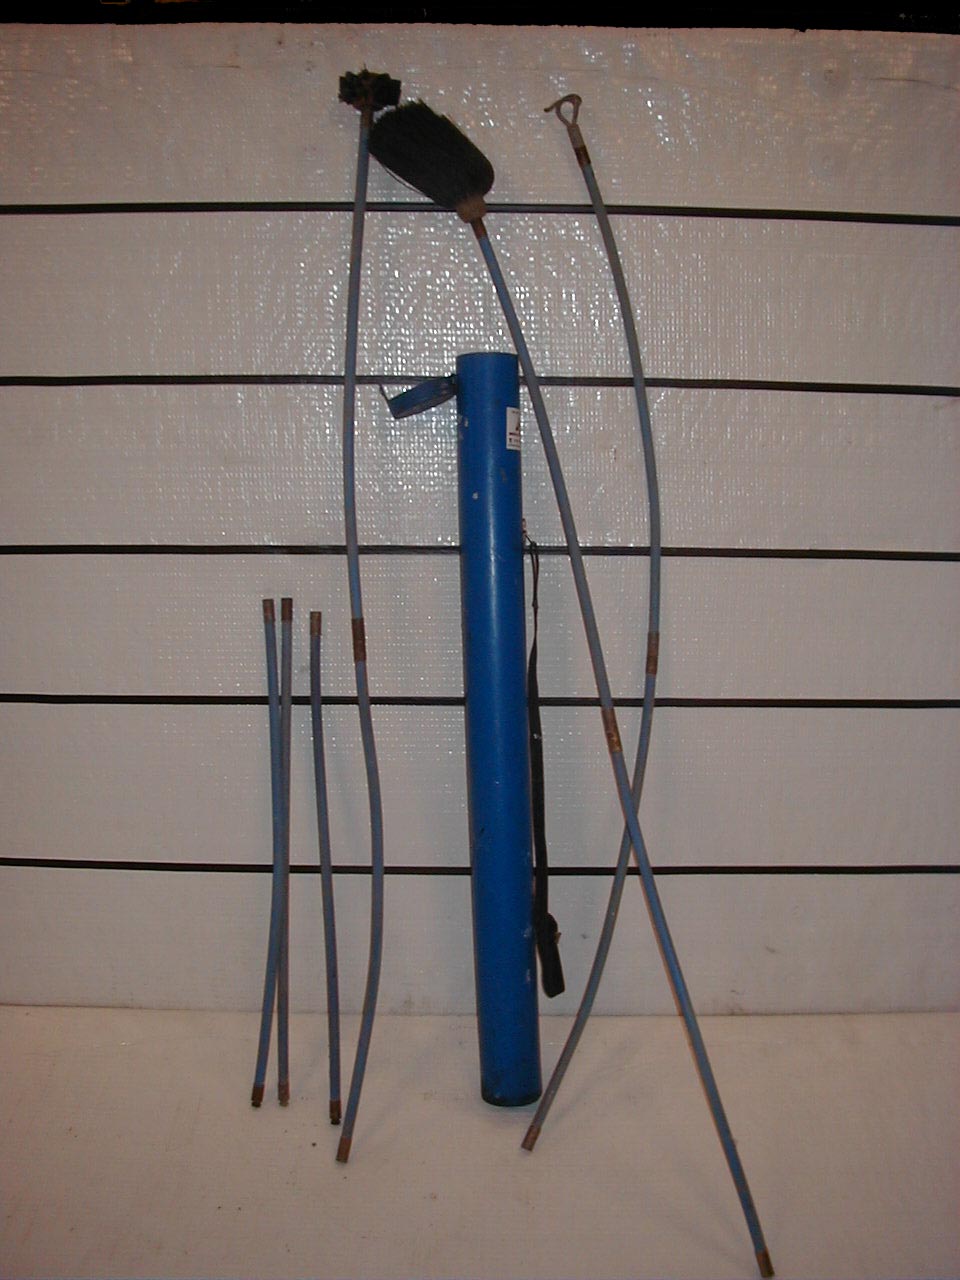 Drain cleaning rods - Drain Cleaning Rods